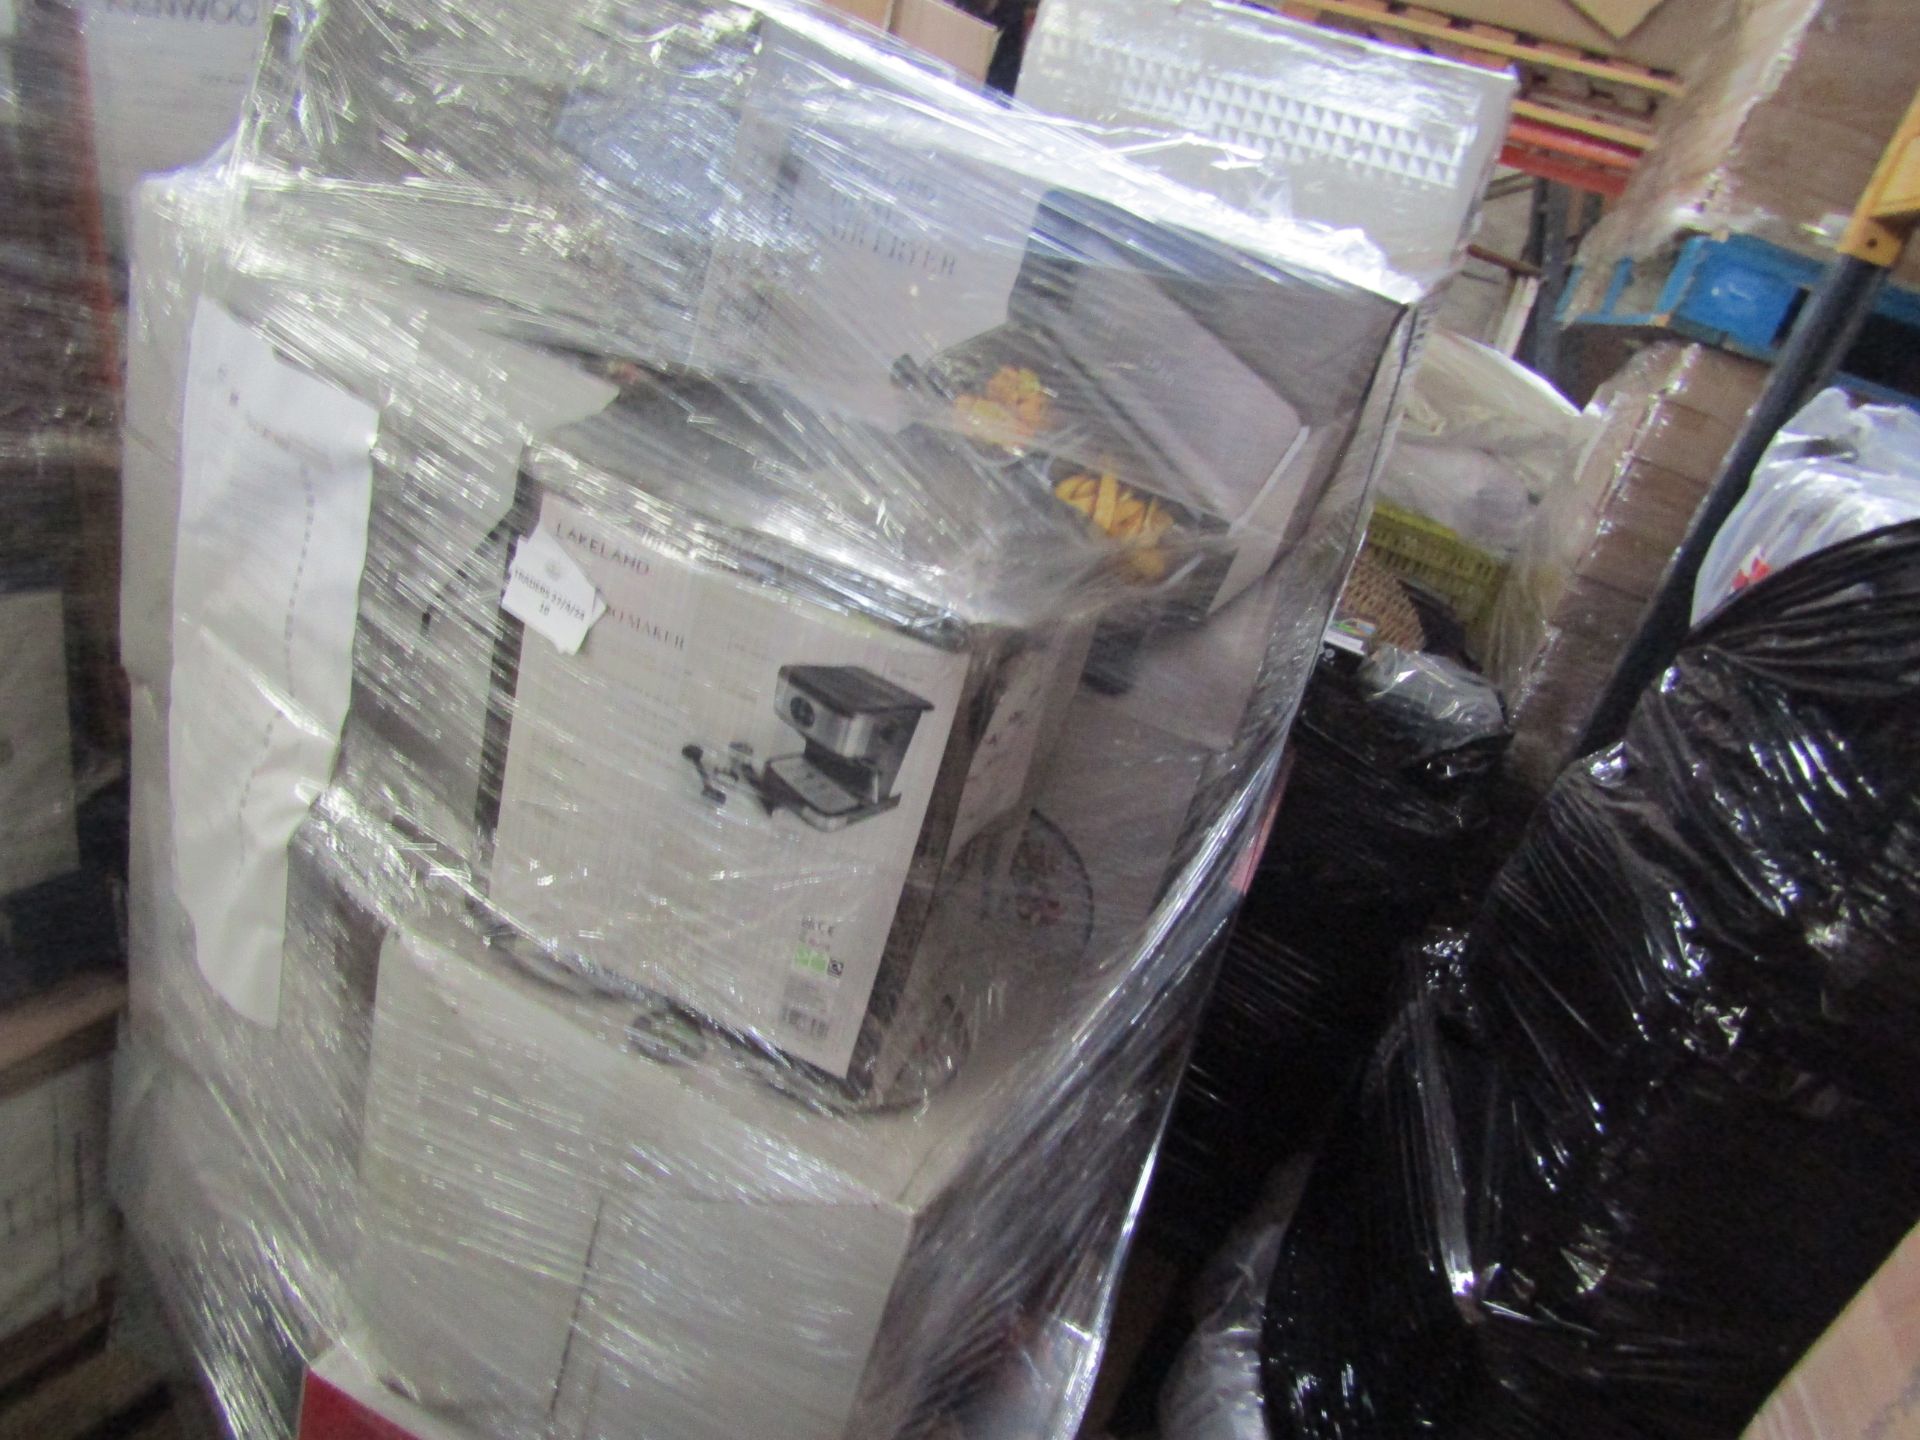 Mixed Lot of 27 x Lakeland Customer Returns for Repair or Upcycling - Total RRP approx 3809.73